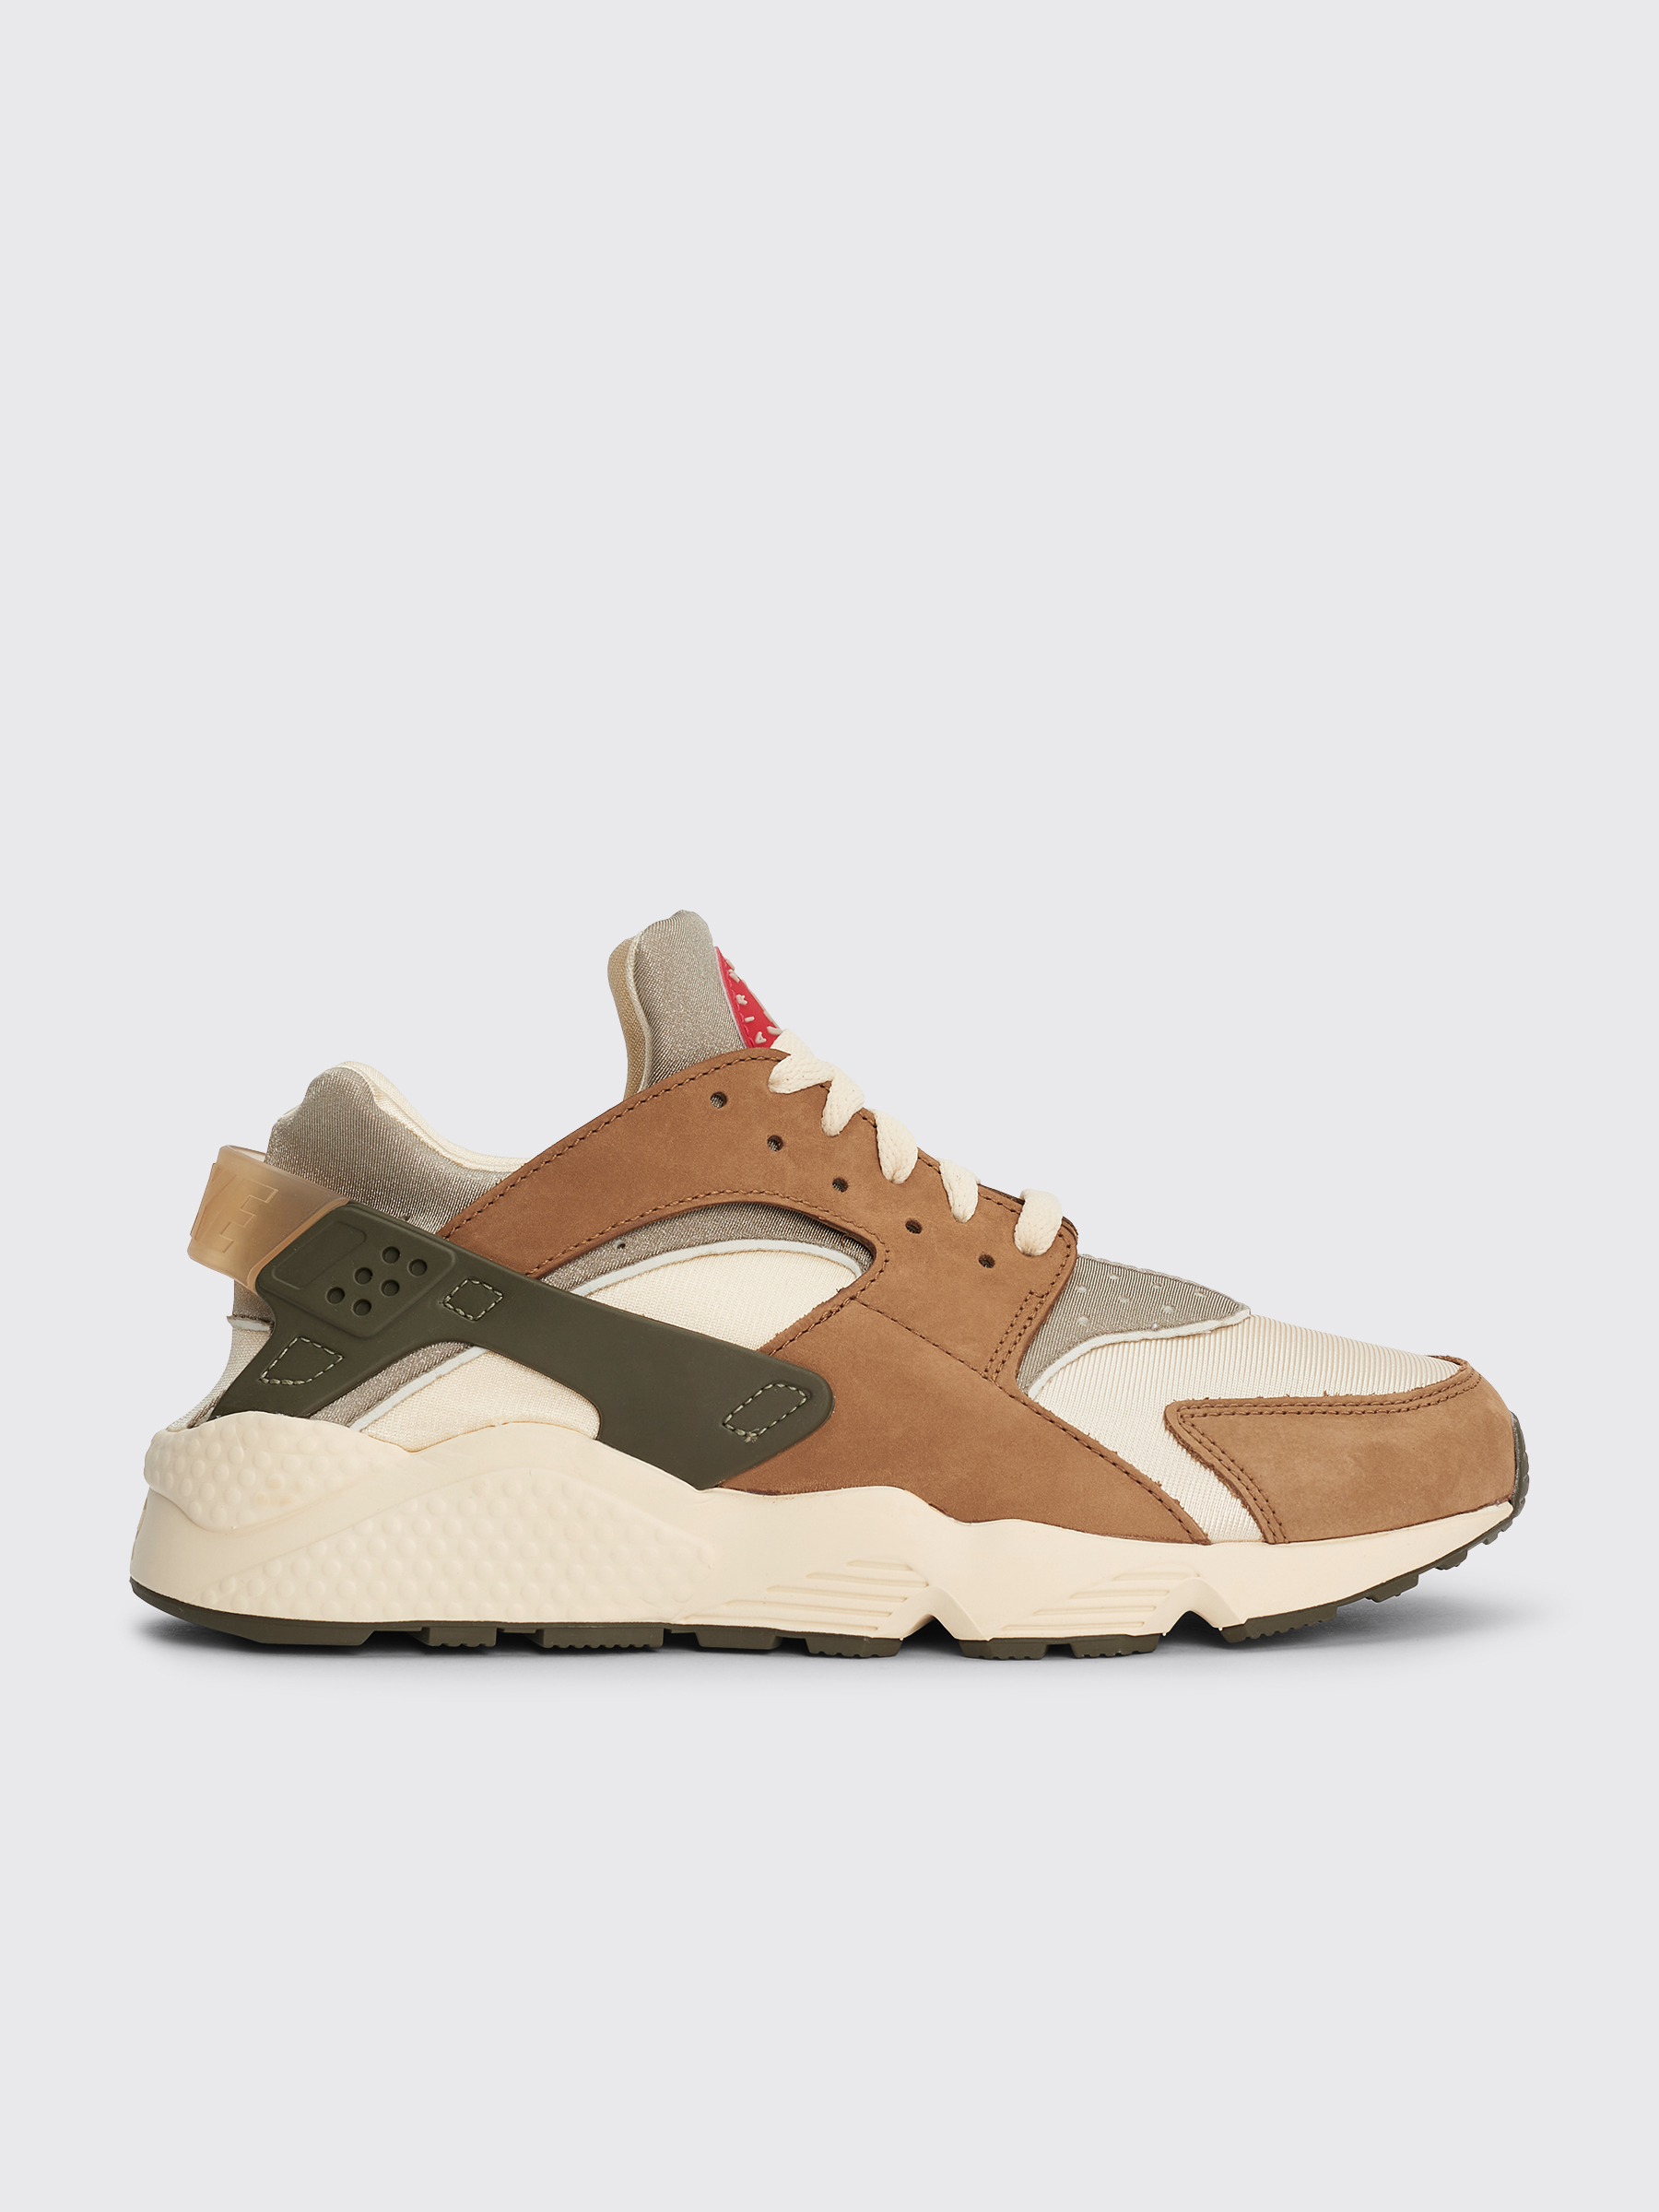 huarache pictures